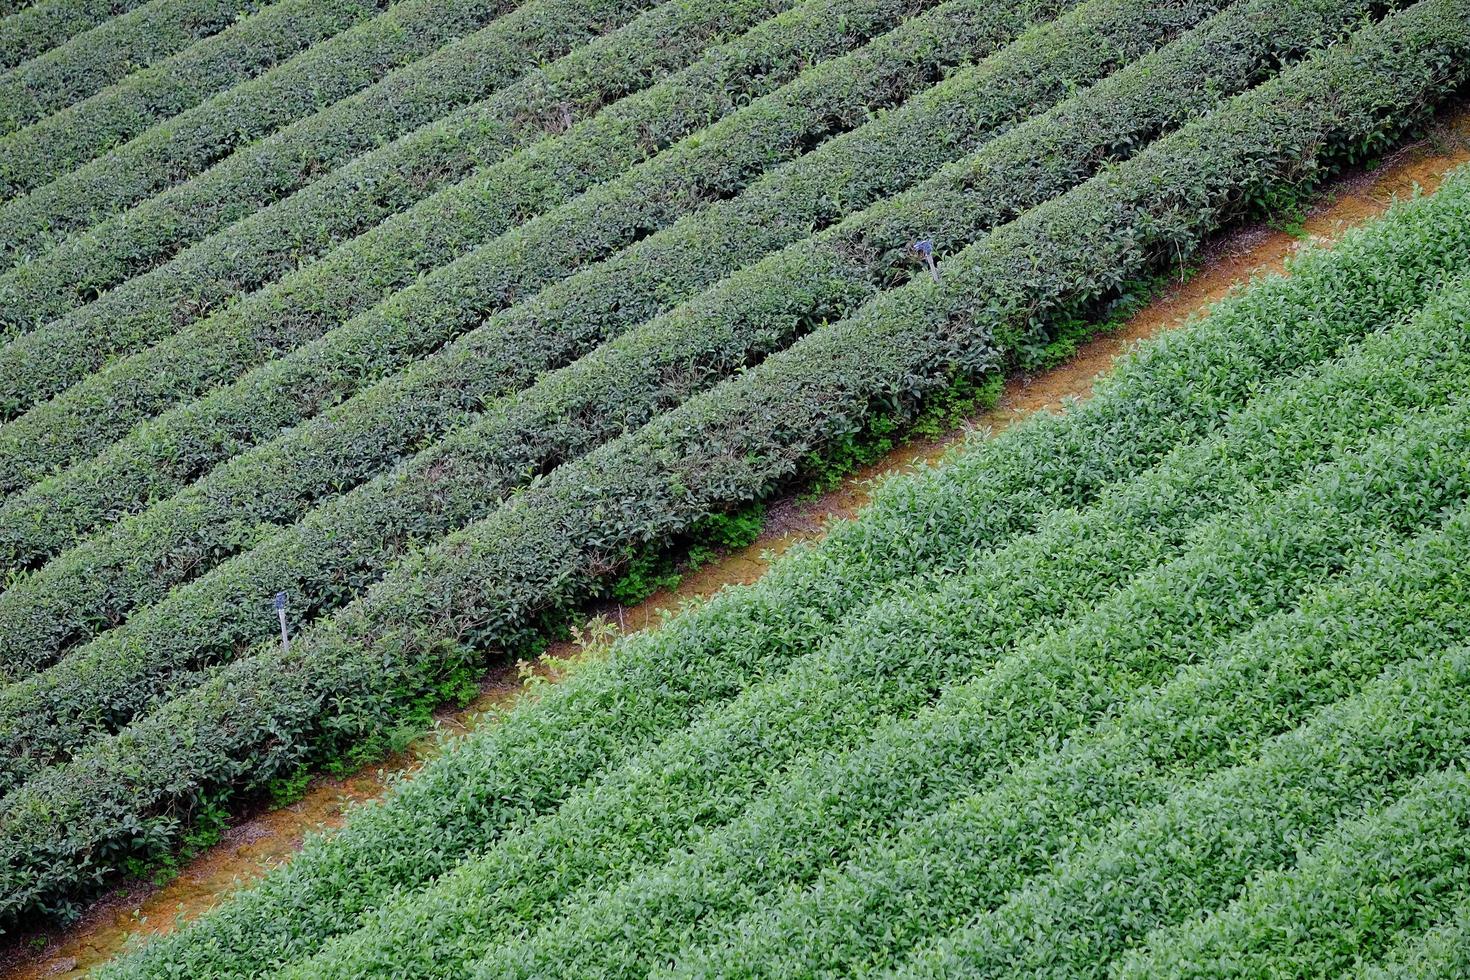 Rows of crops photo